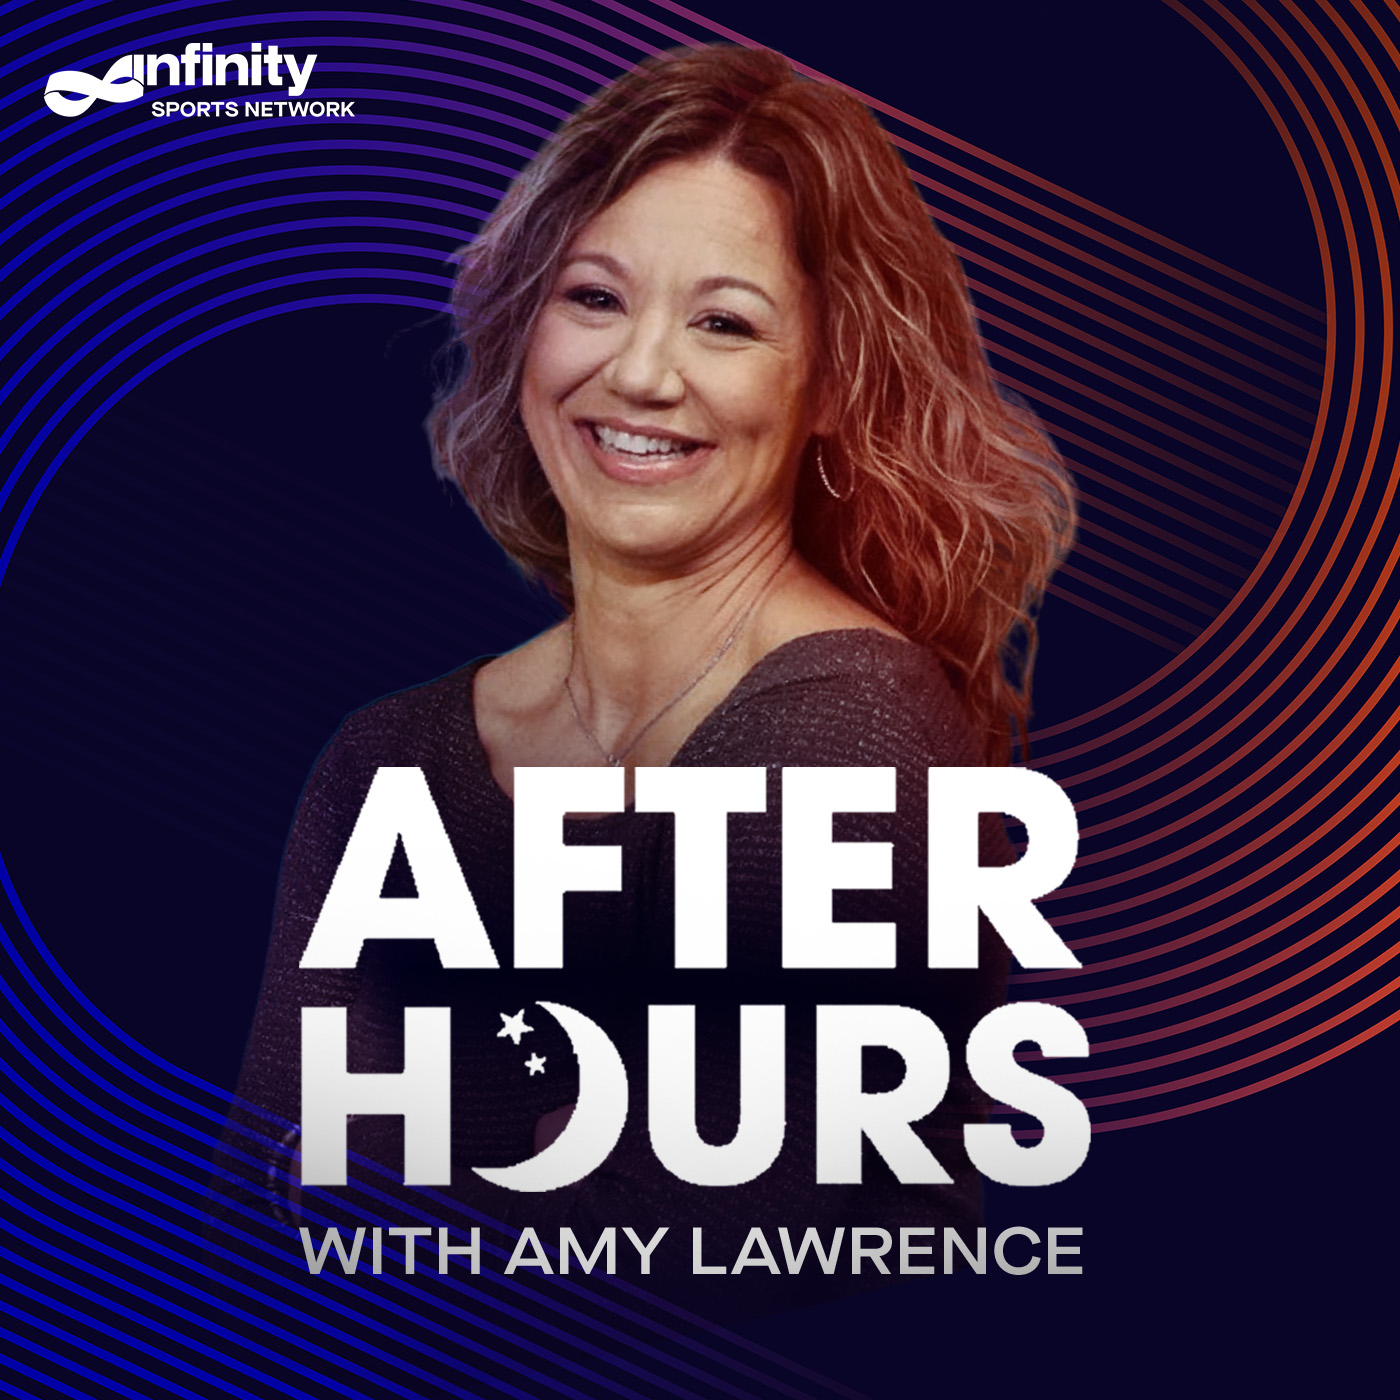 5/19/21 After Hours with Amy Lawrence PODCAST: Hour 3